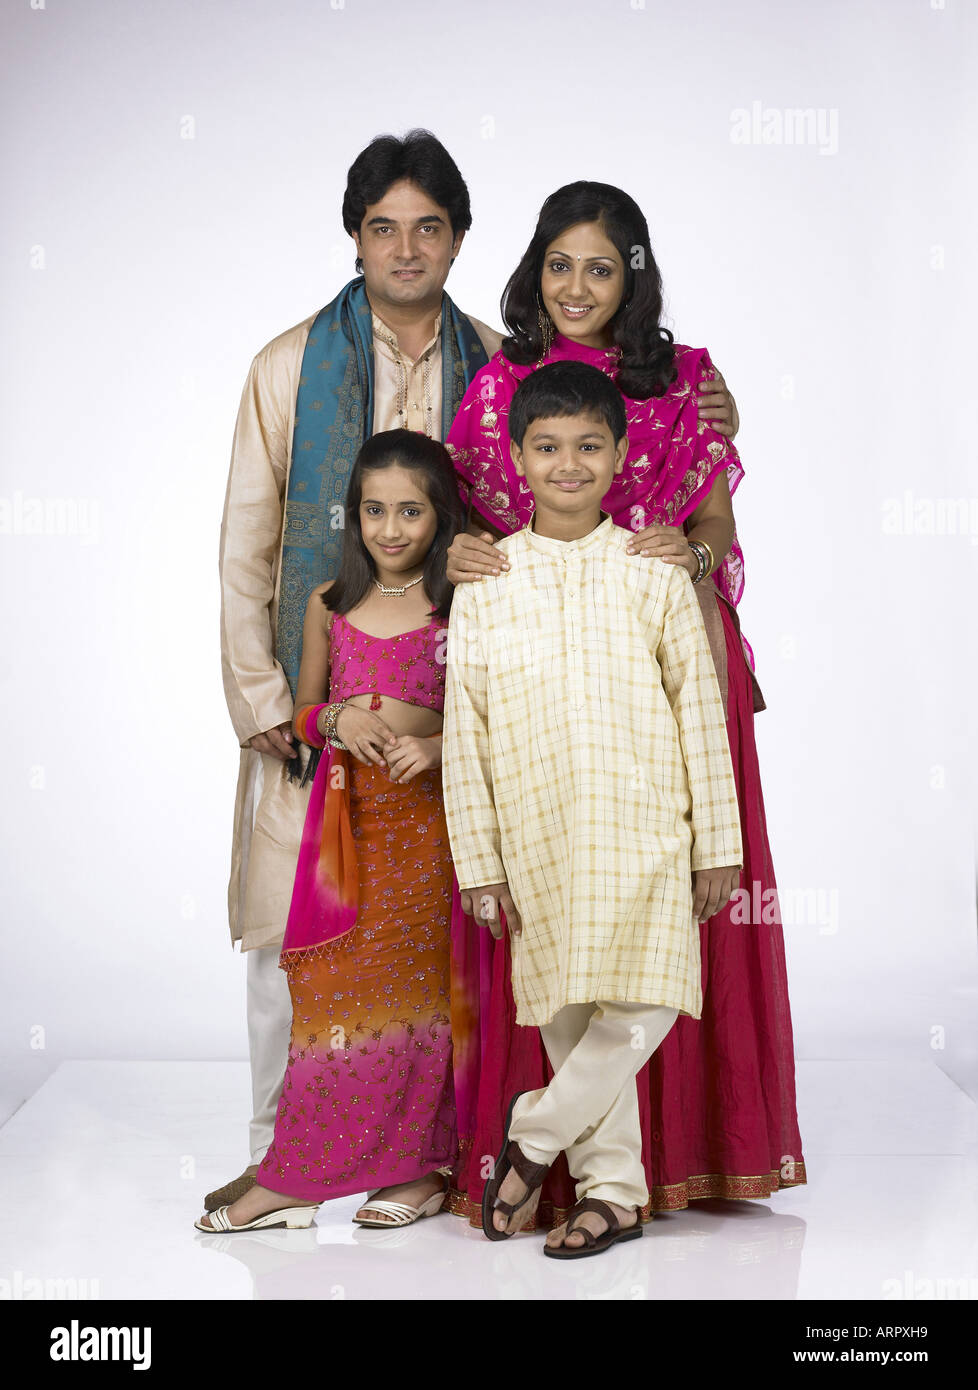 South Asian Indian Family W